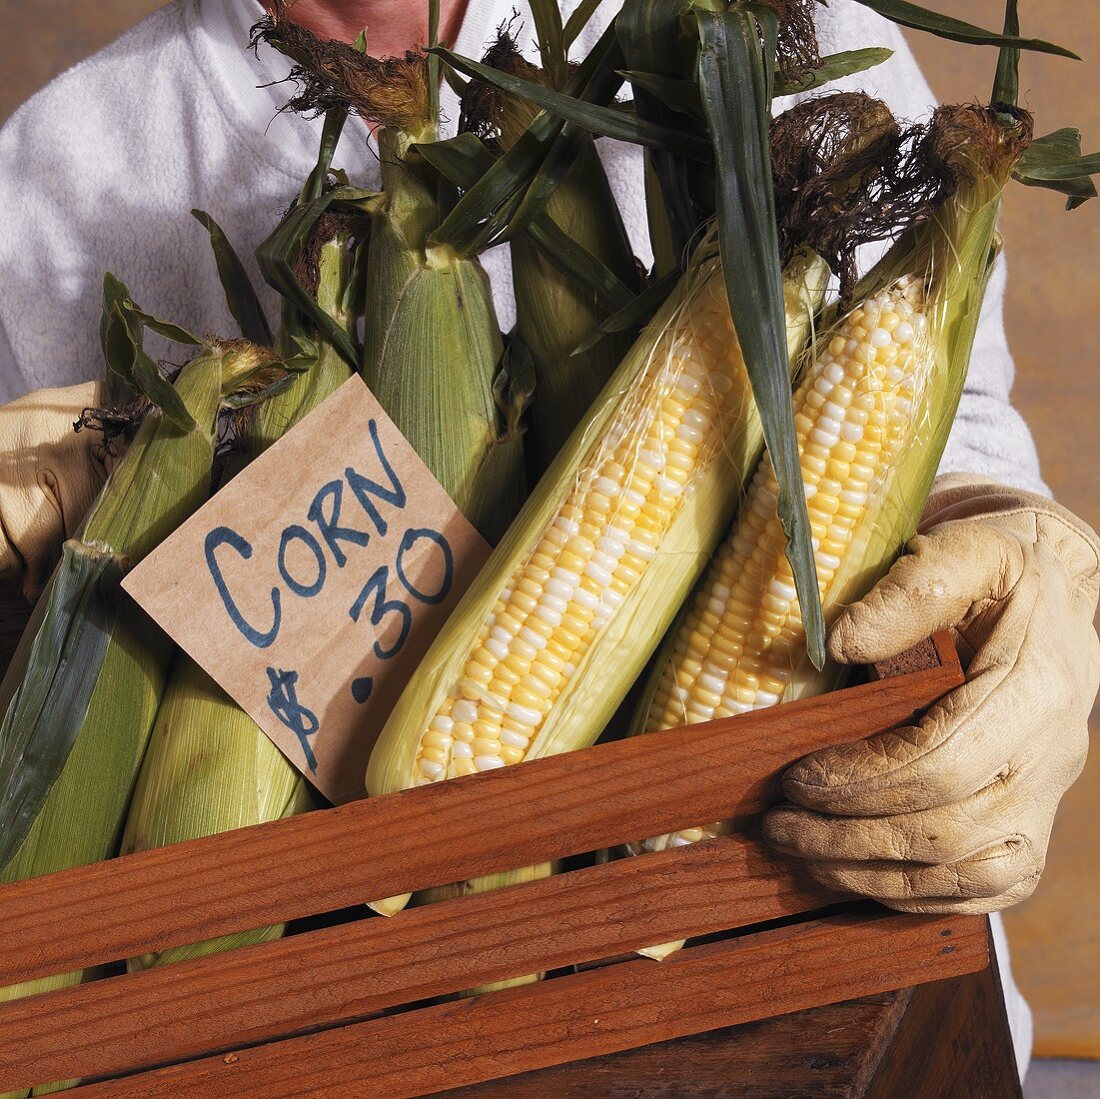 Corn cobs in a wooden crate with a price label